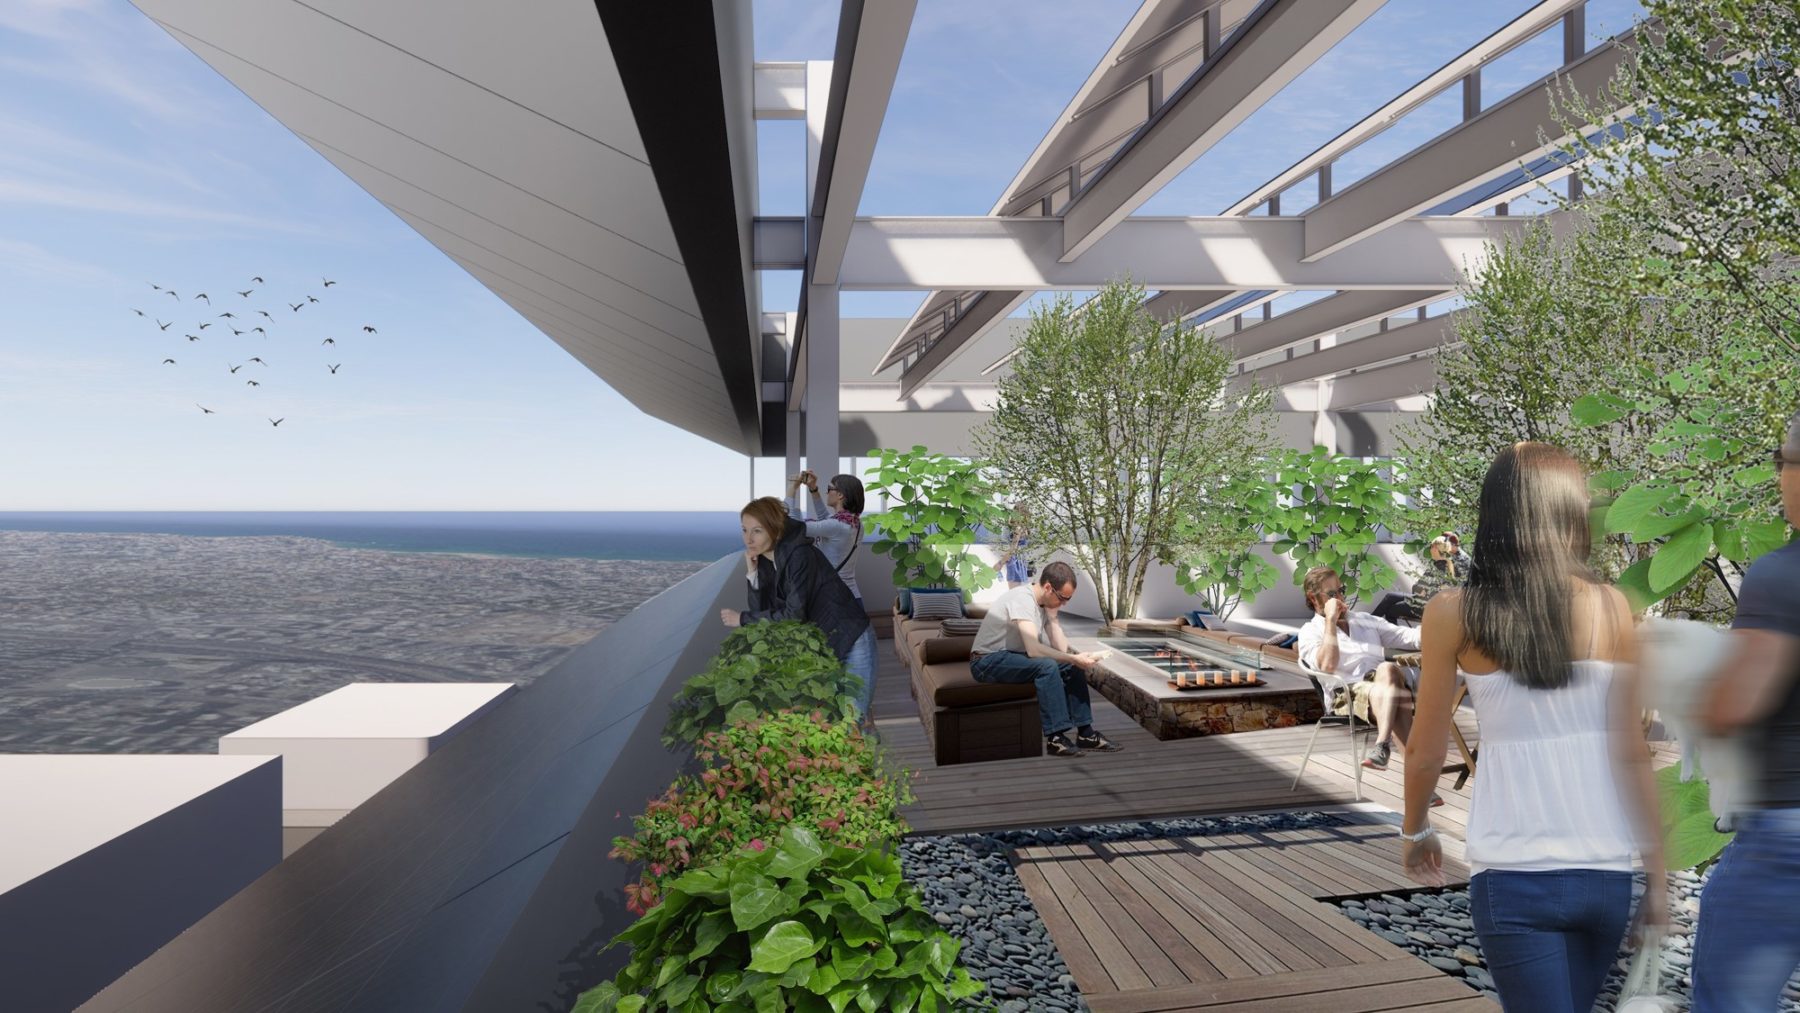 Rendering of woman looking out over view of ocean below an open-air roof-deck